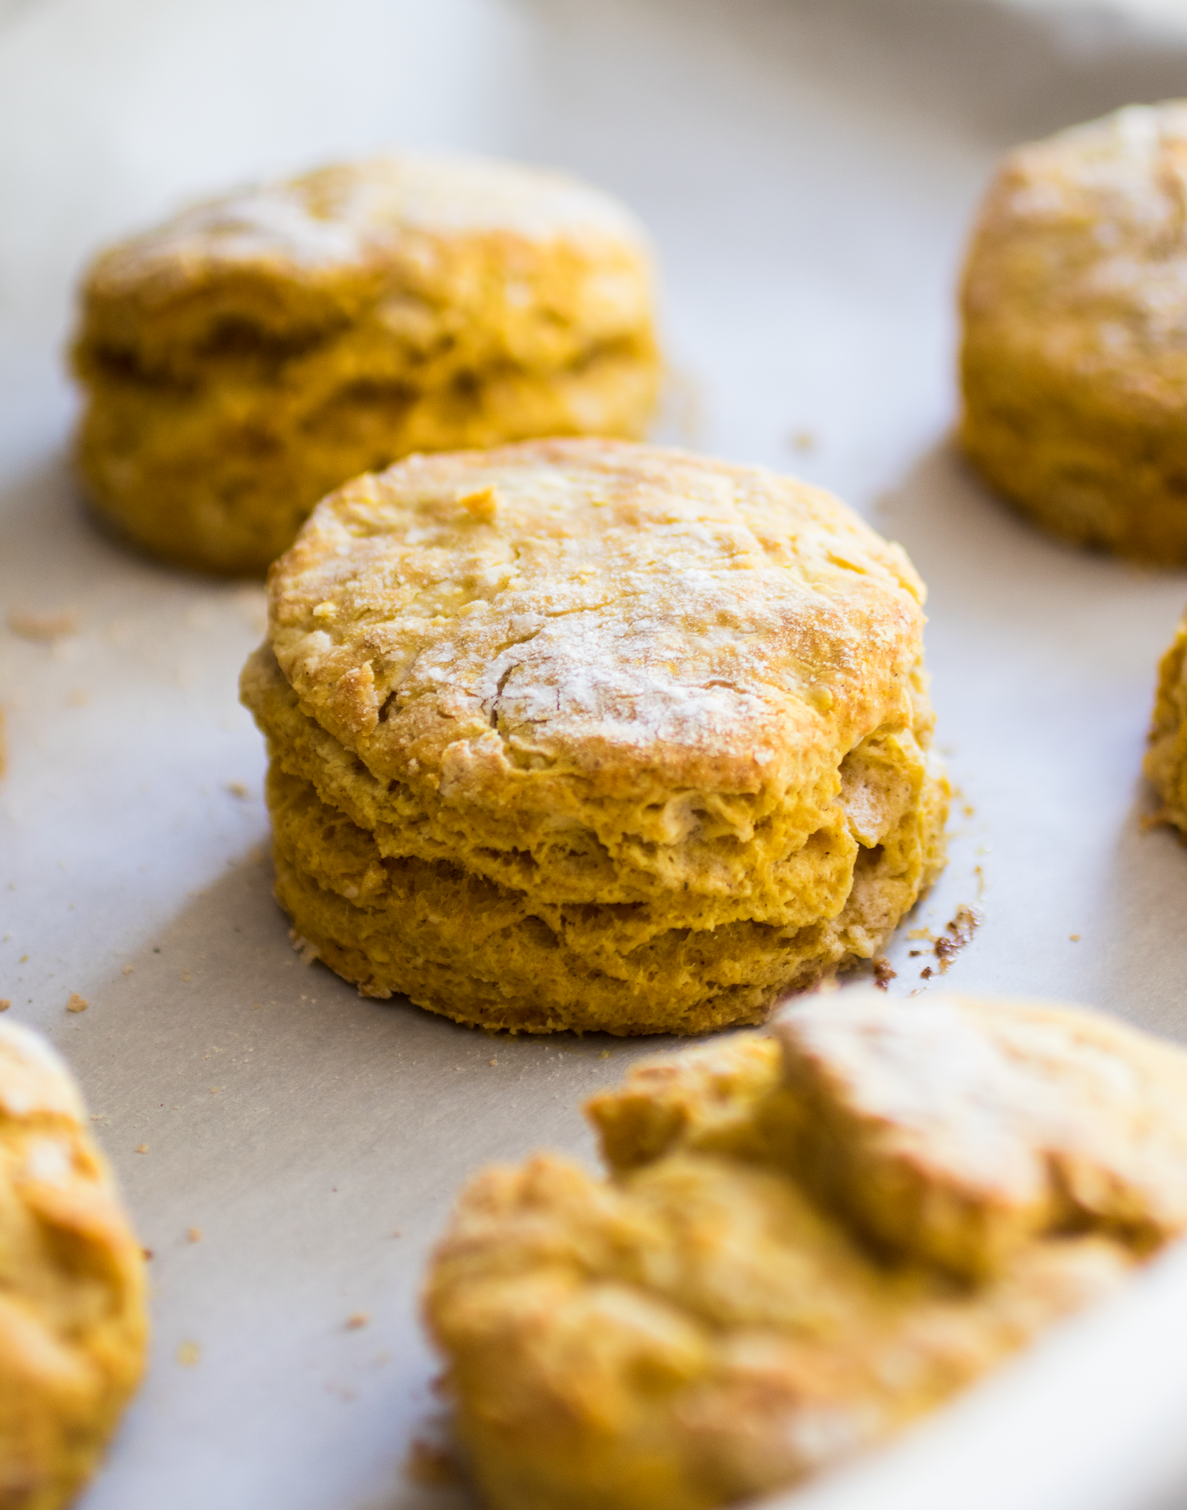 Fresh biscuits on a baking sheet lined with parchment paper.